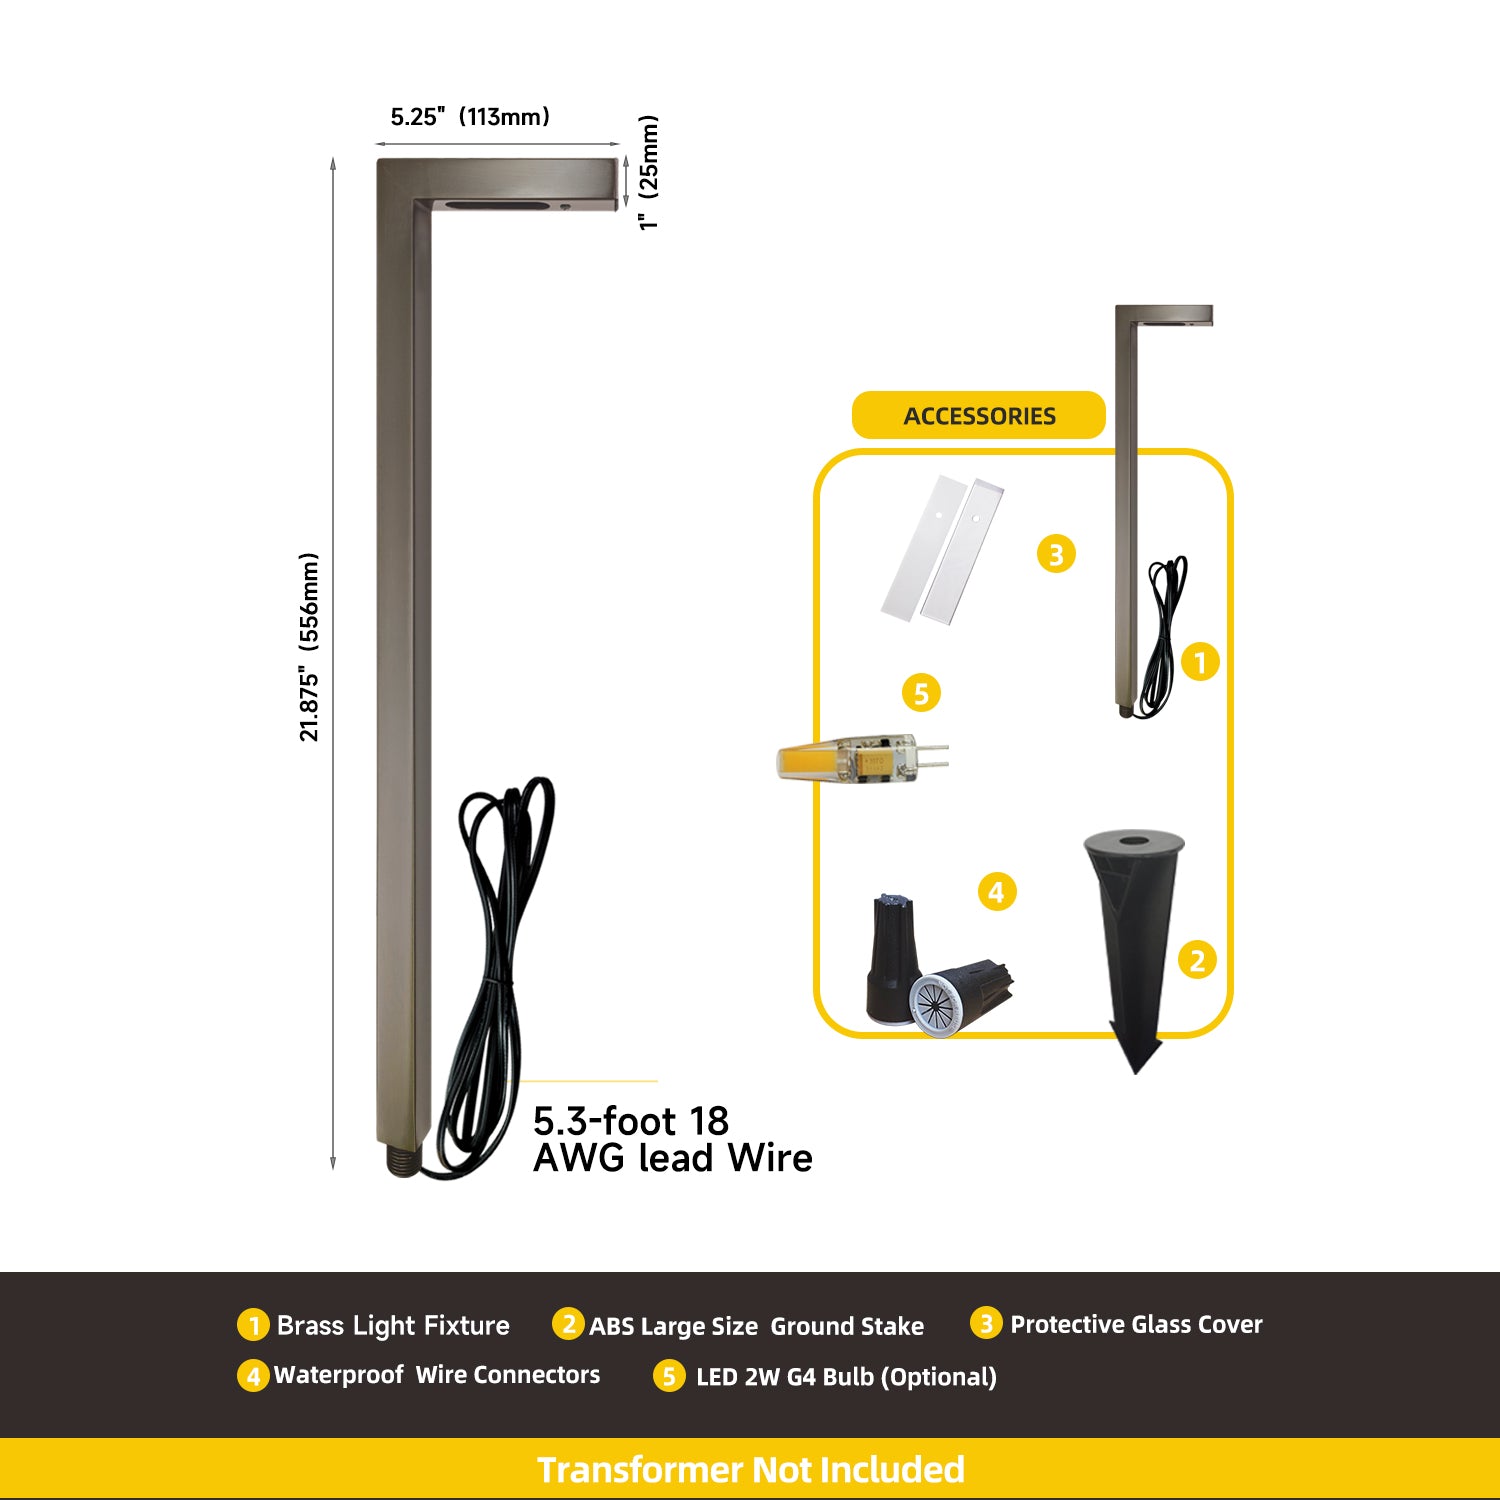 Low Voltage Outdoor Brass Path Light with 5.3-foot lead wire, ground stake, protective glass cover, and optional LED 2W G4 bulb.